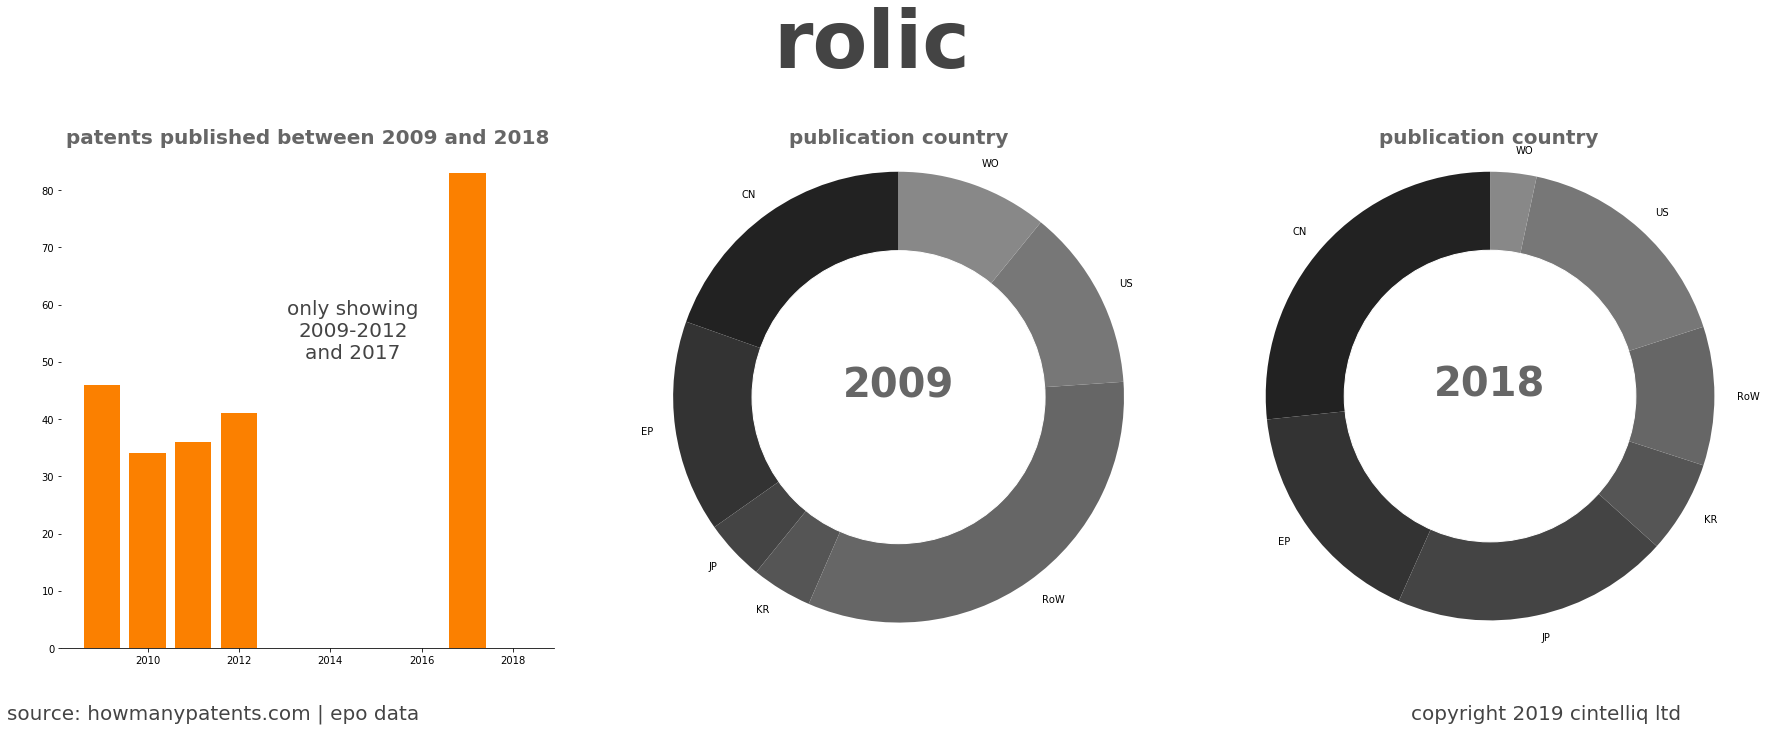 summary of patents for Rolic